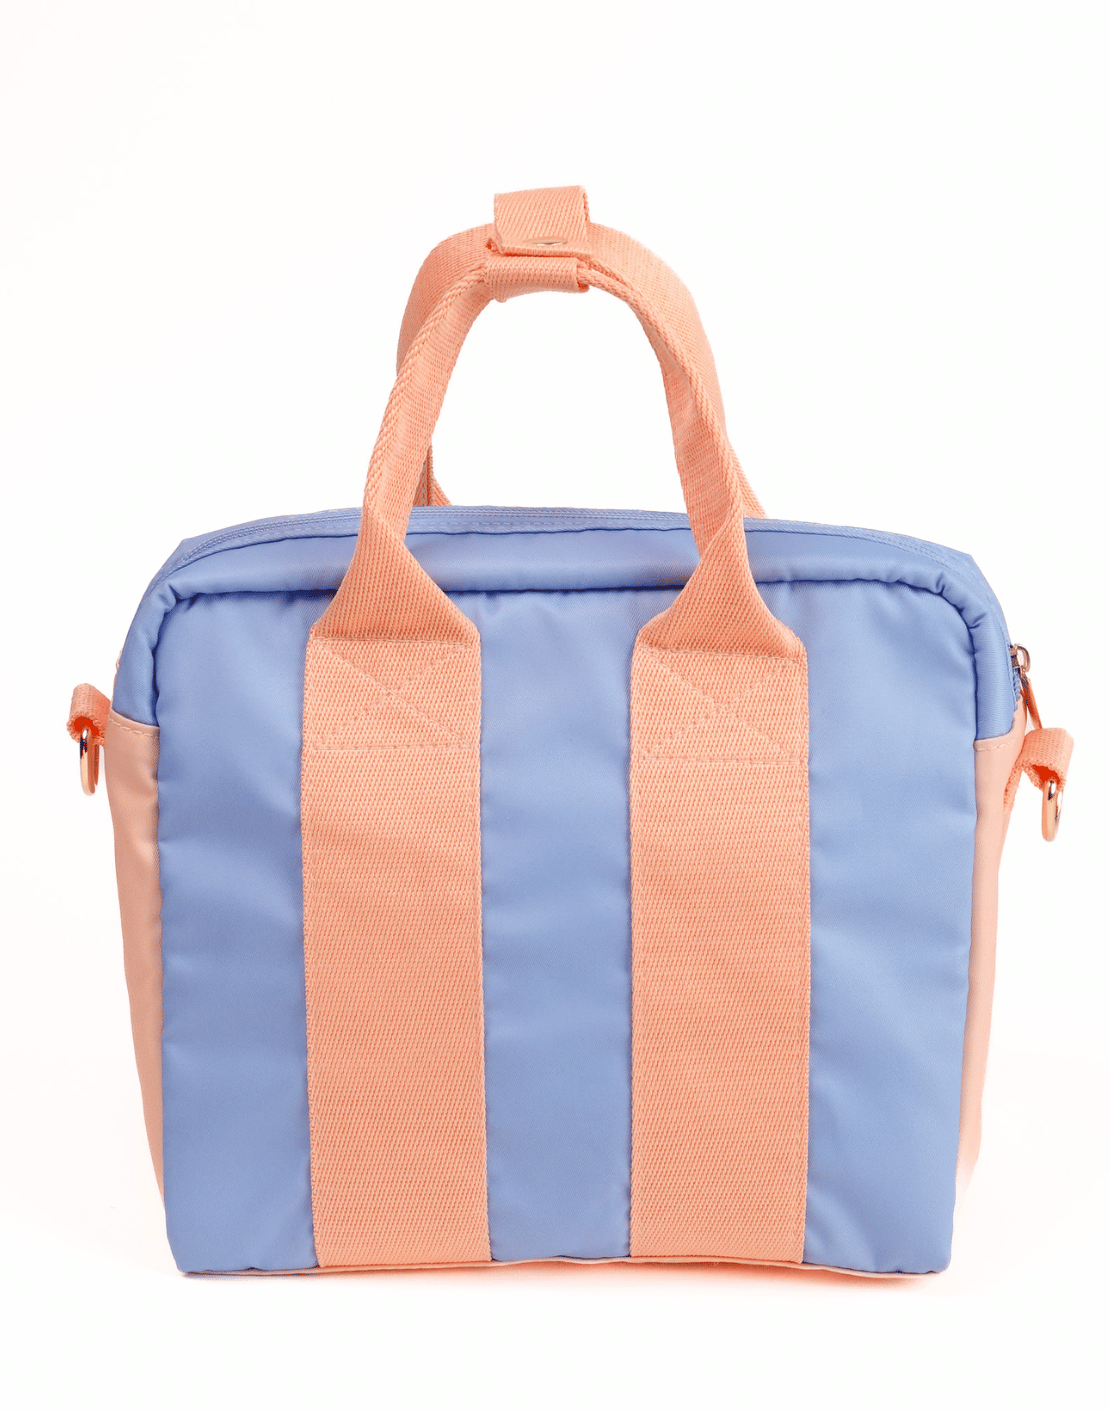 Blueberry Jam Lunch Tote